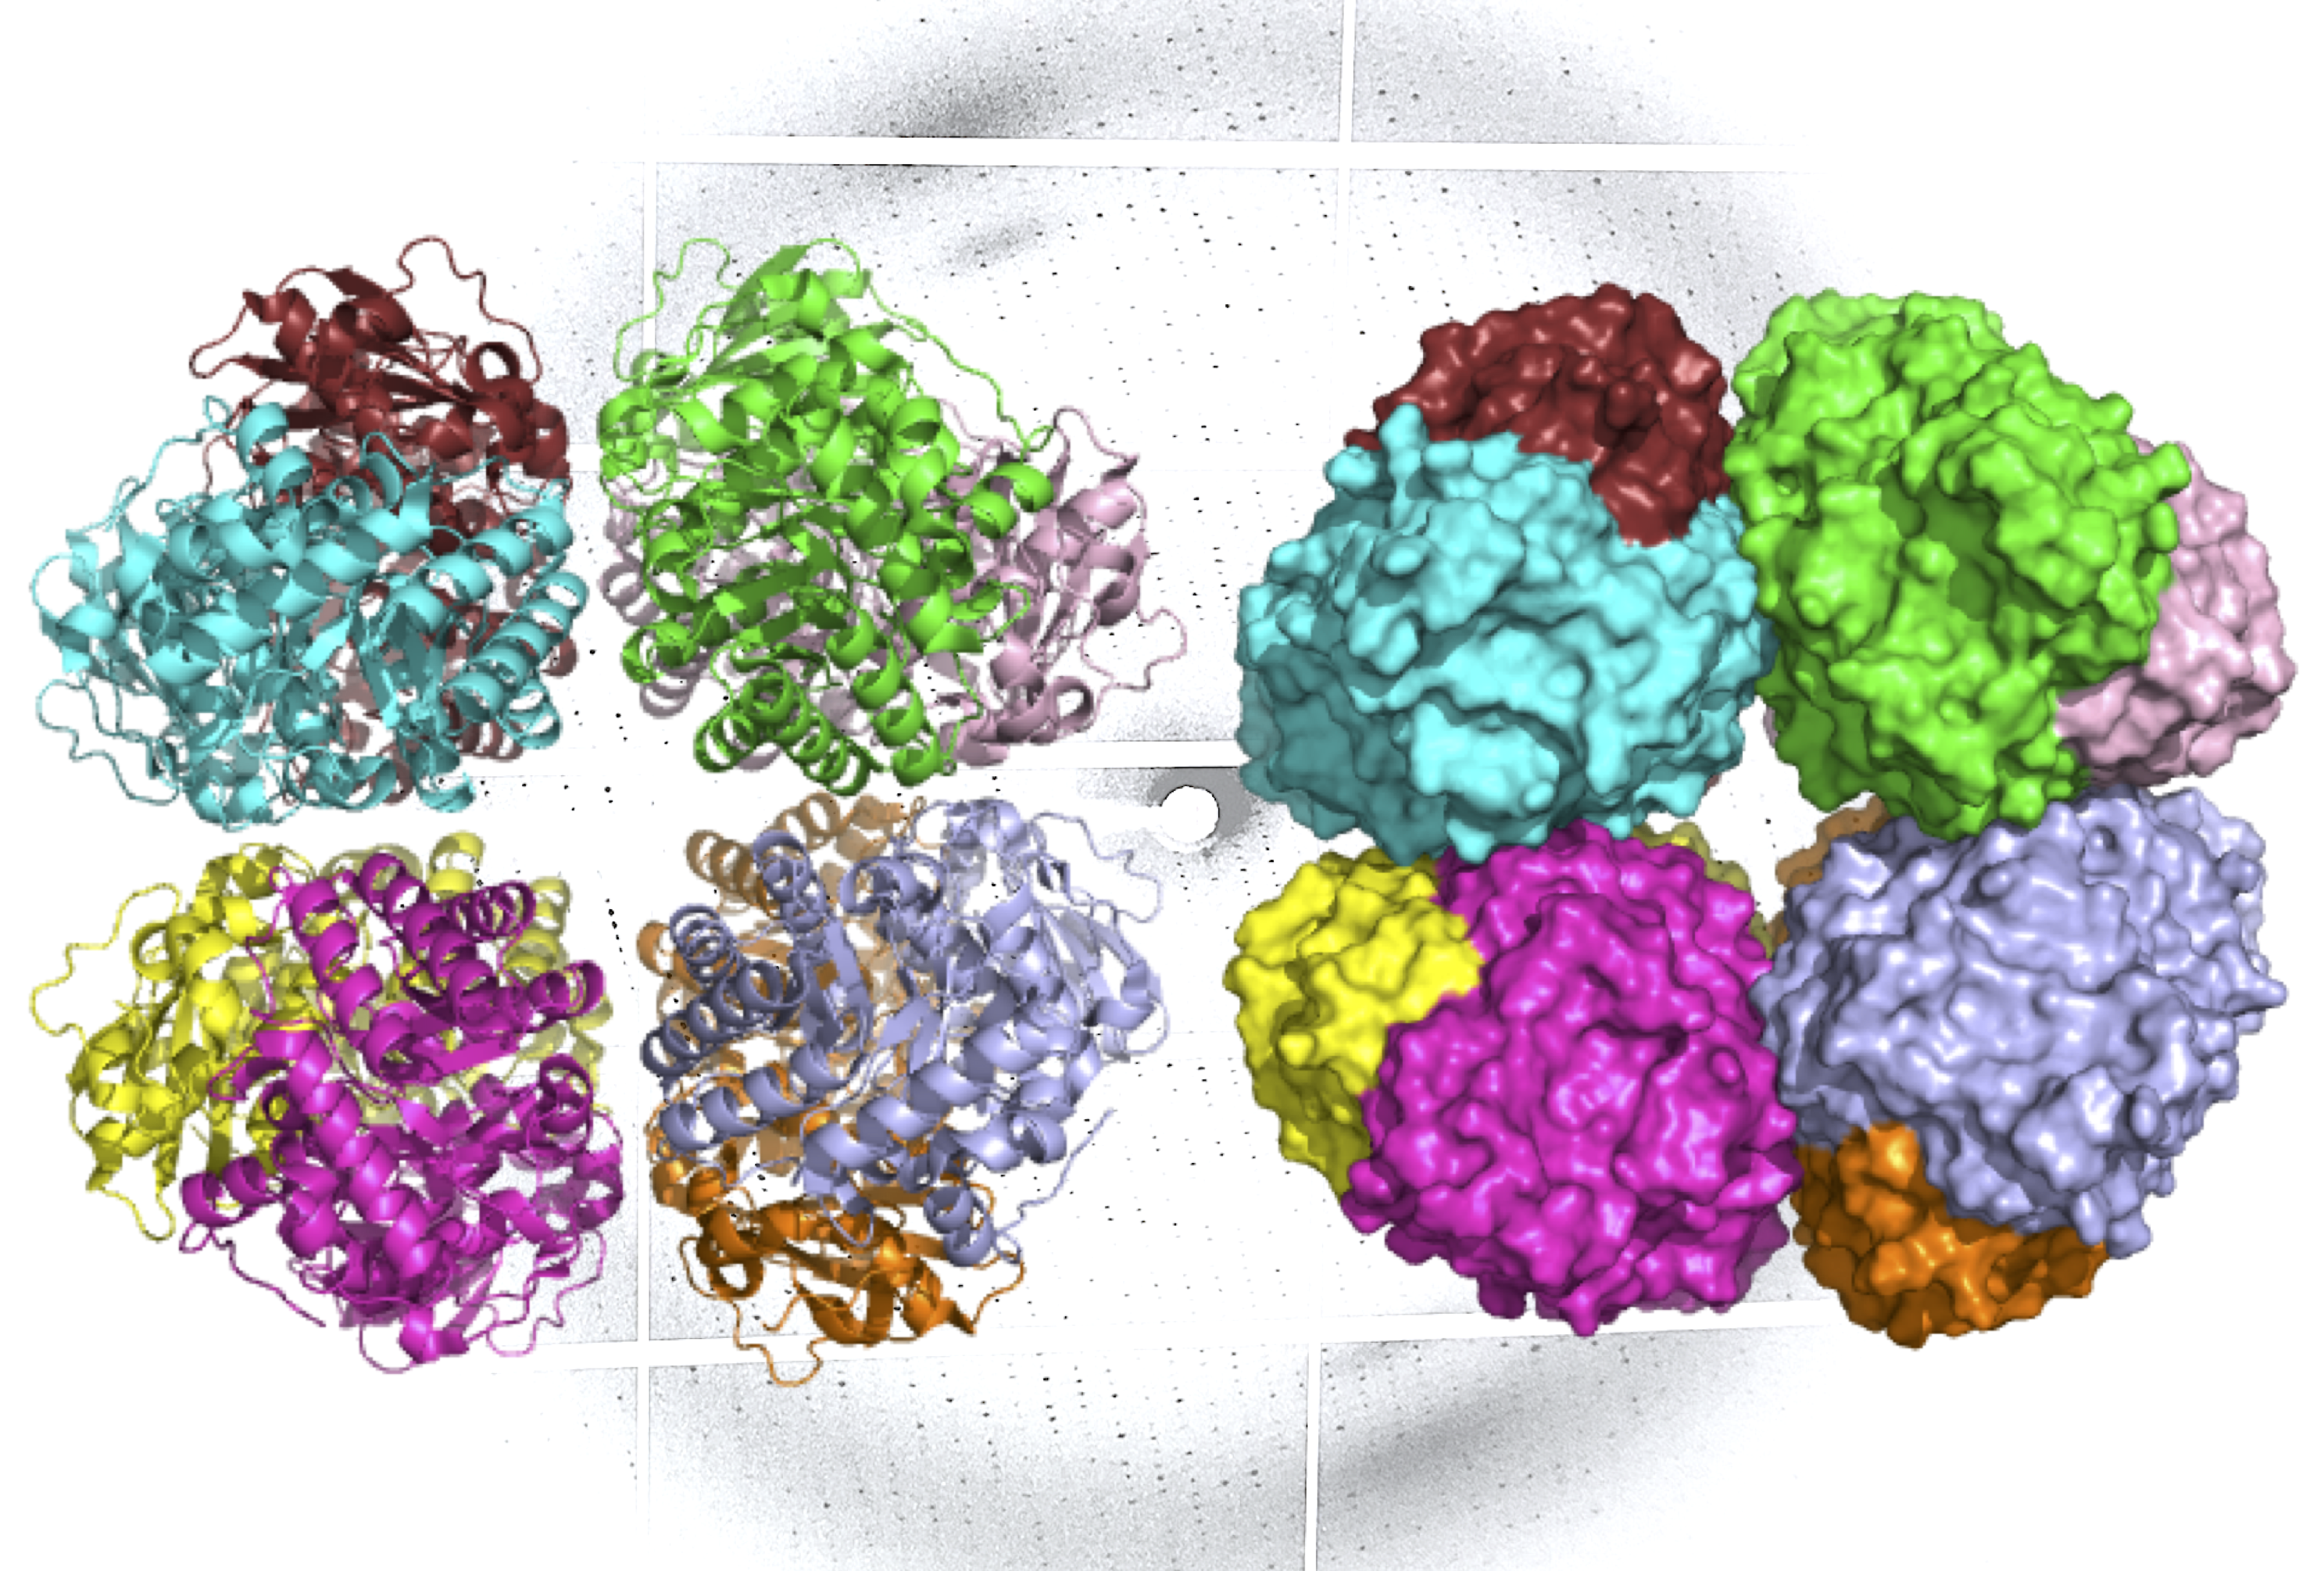 Molecular models of the form I' rubisco enzyme, a version of the essential photosynthetic enzyme believed to date back more than 2.4 billion years